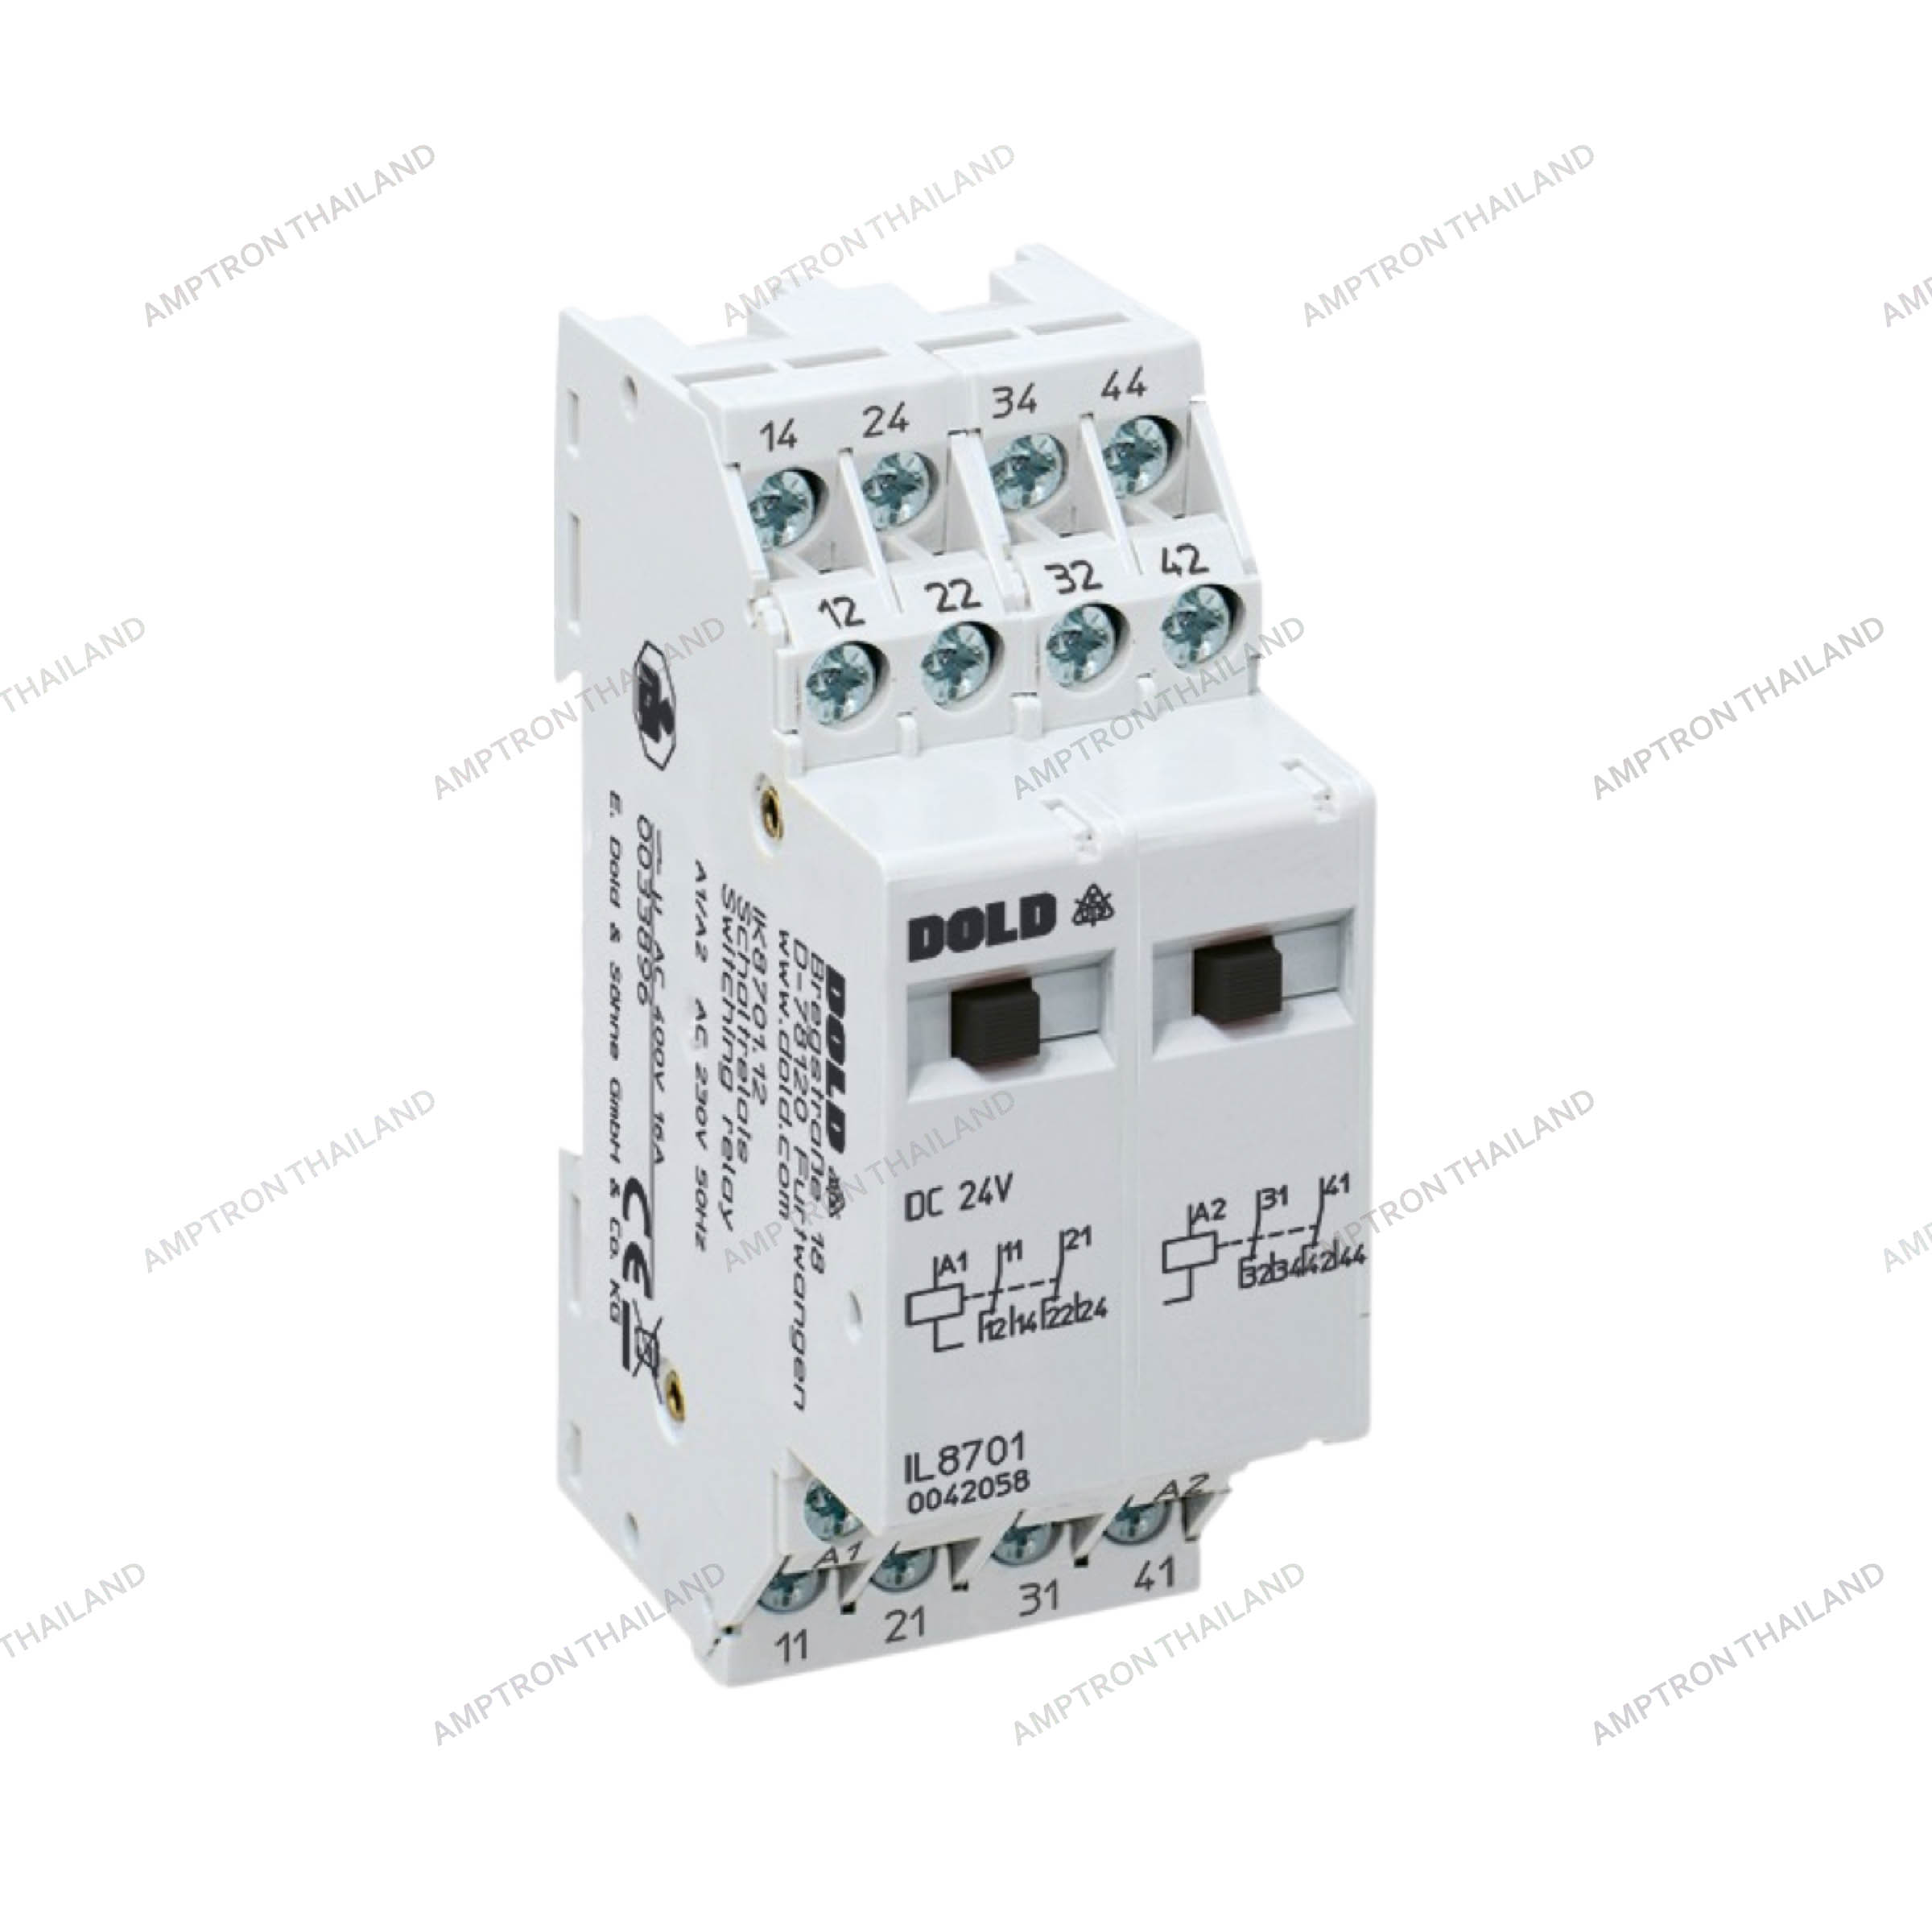 IL 8701 Switching Relay Input-Output Interface Relay